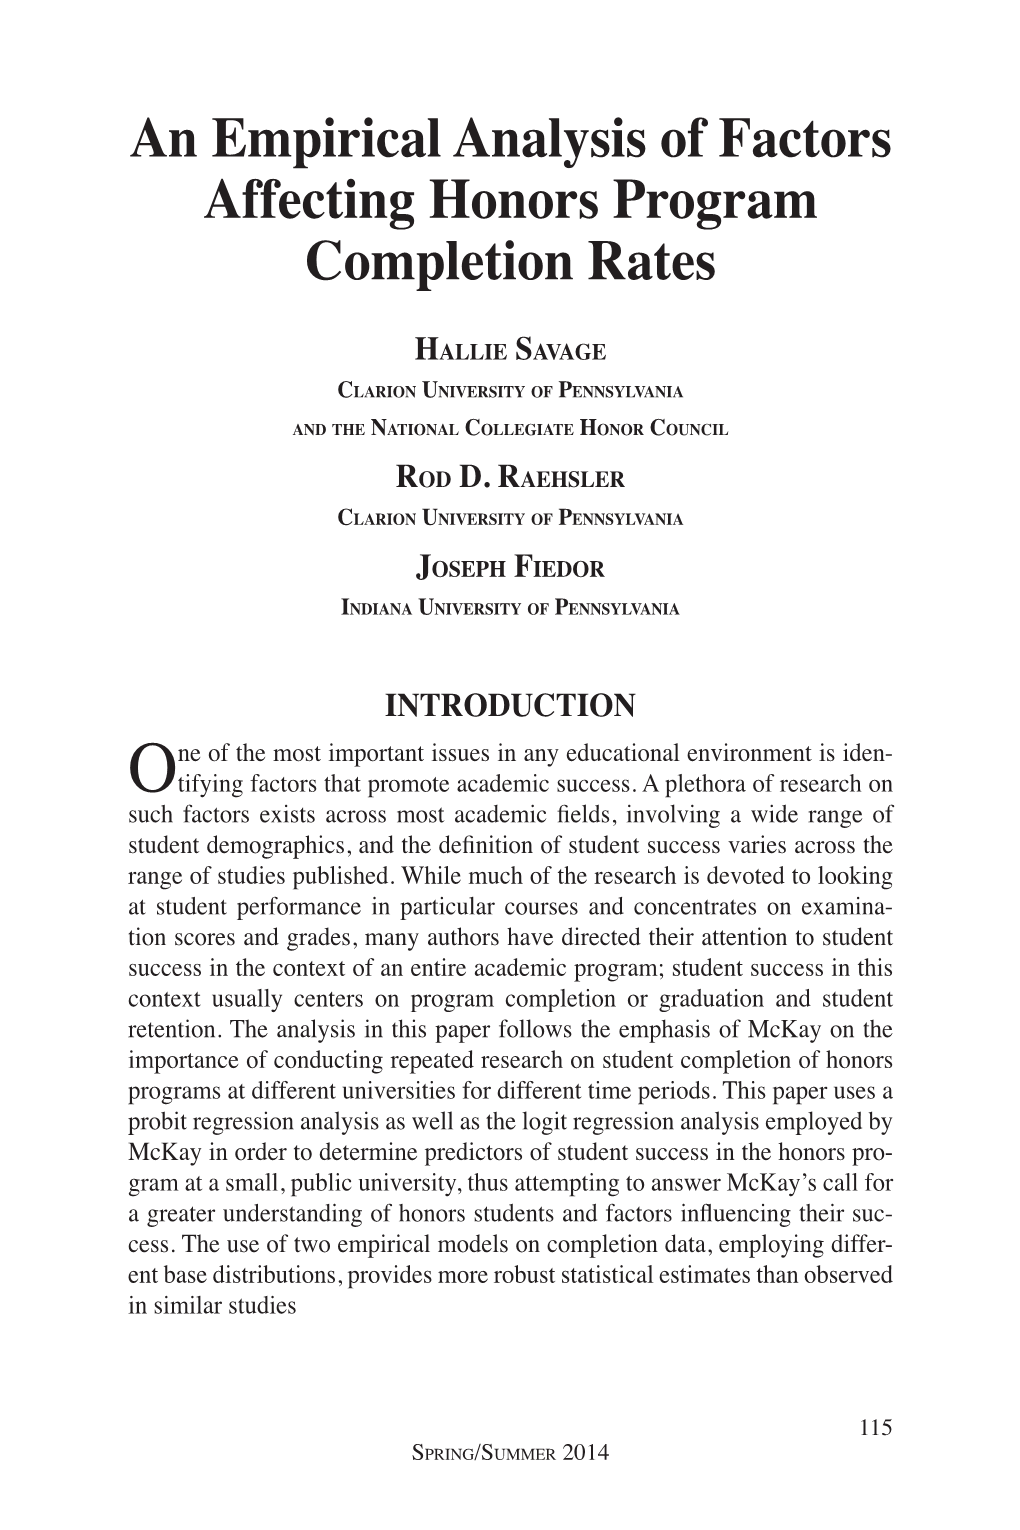 An Empirical Analysis of Factors Affecting Honors Program Completion Rates